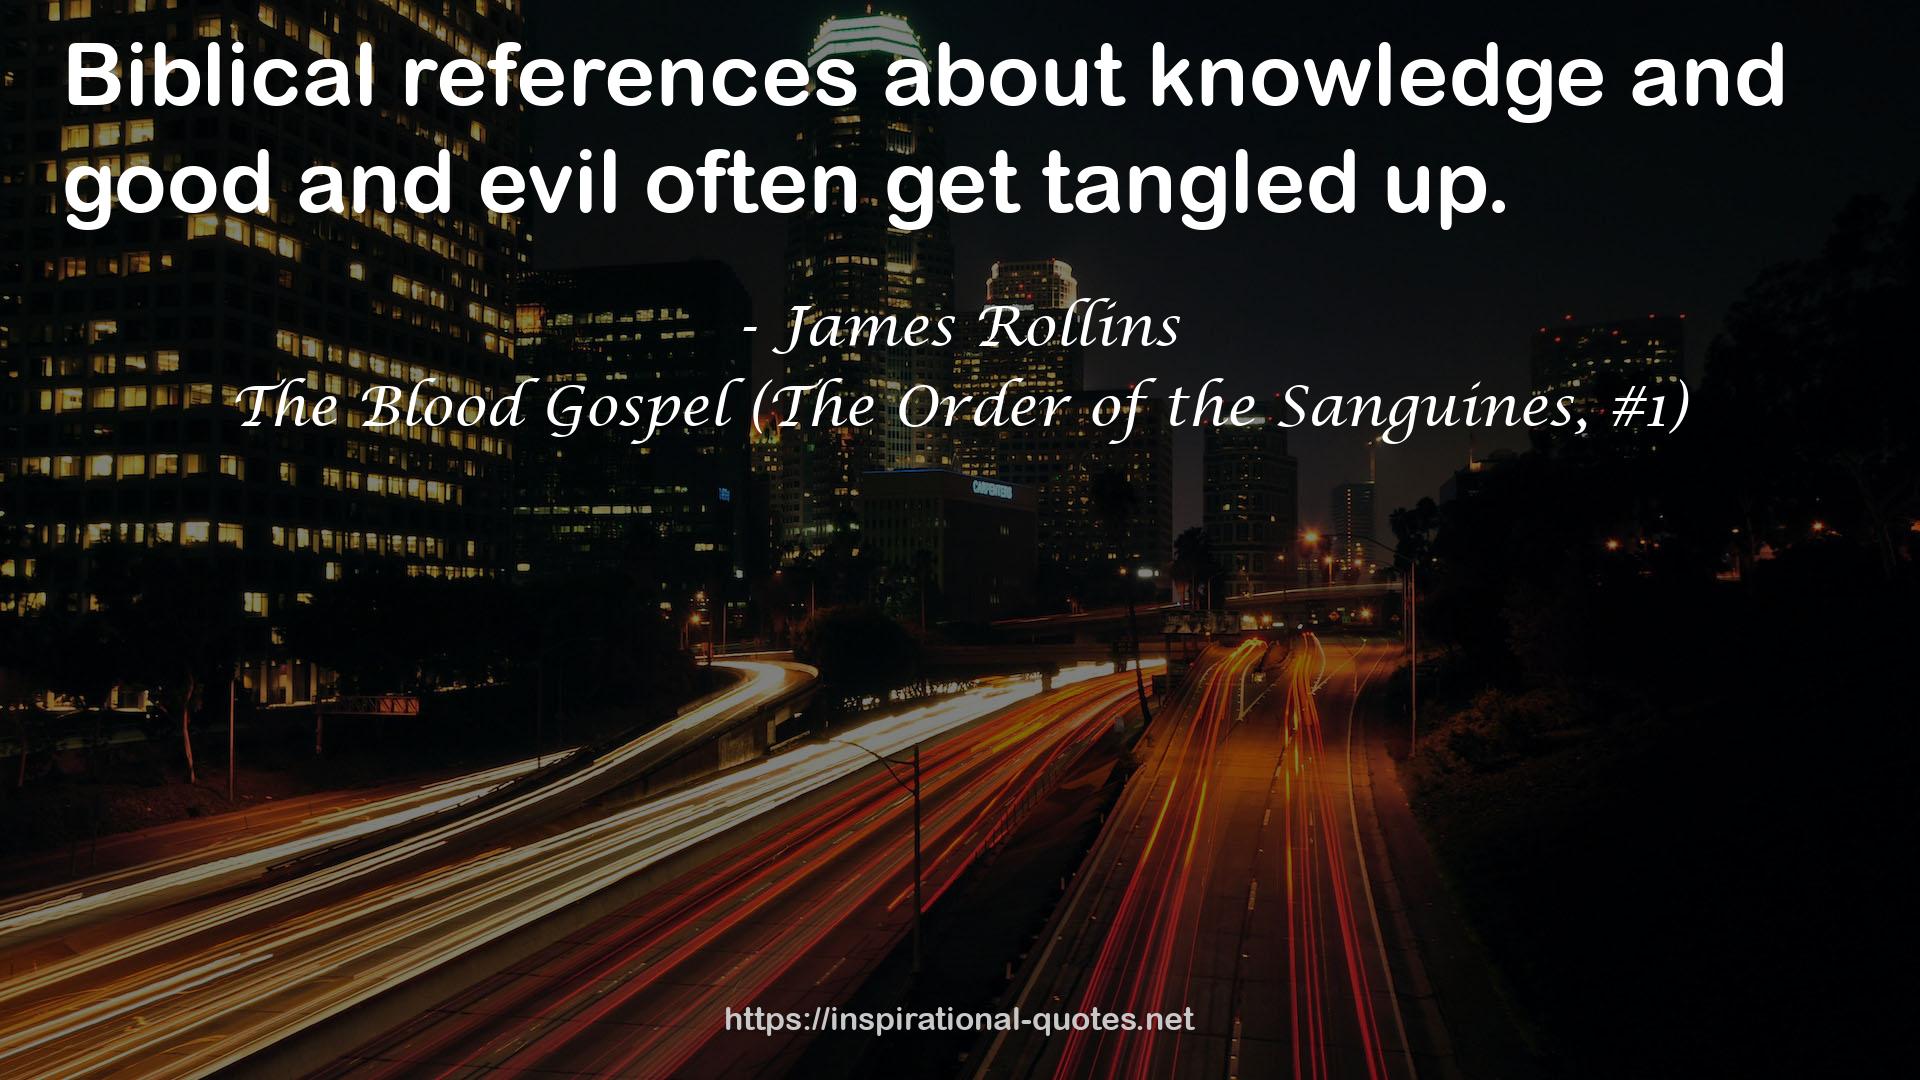 The Blood Gospel (The Order of the Sanguines, #1) QUOTES